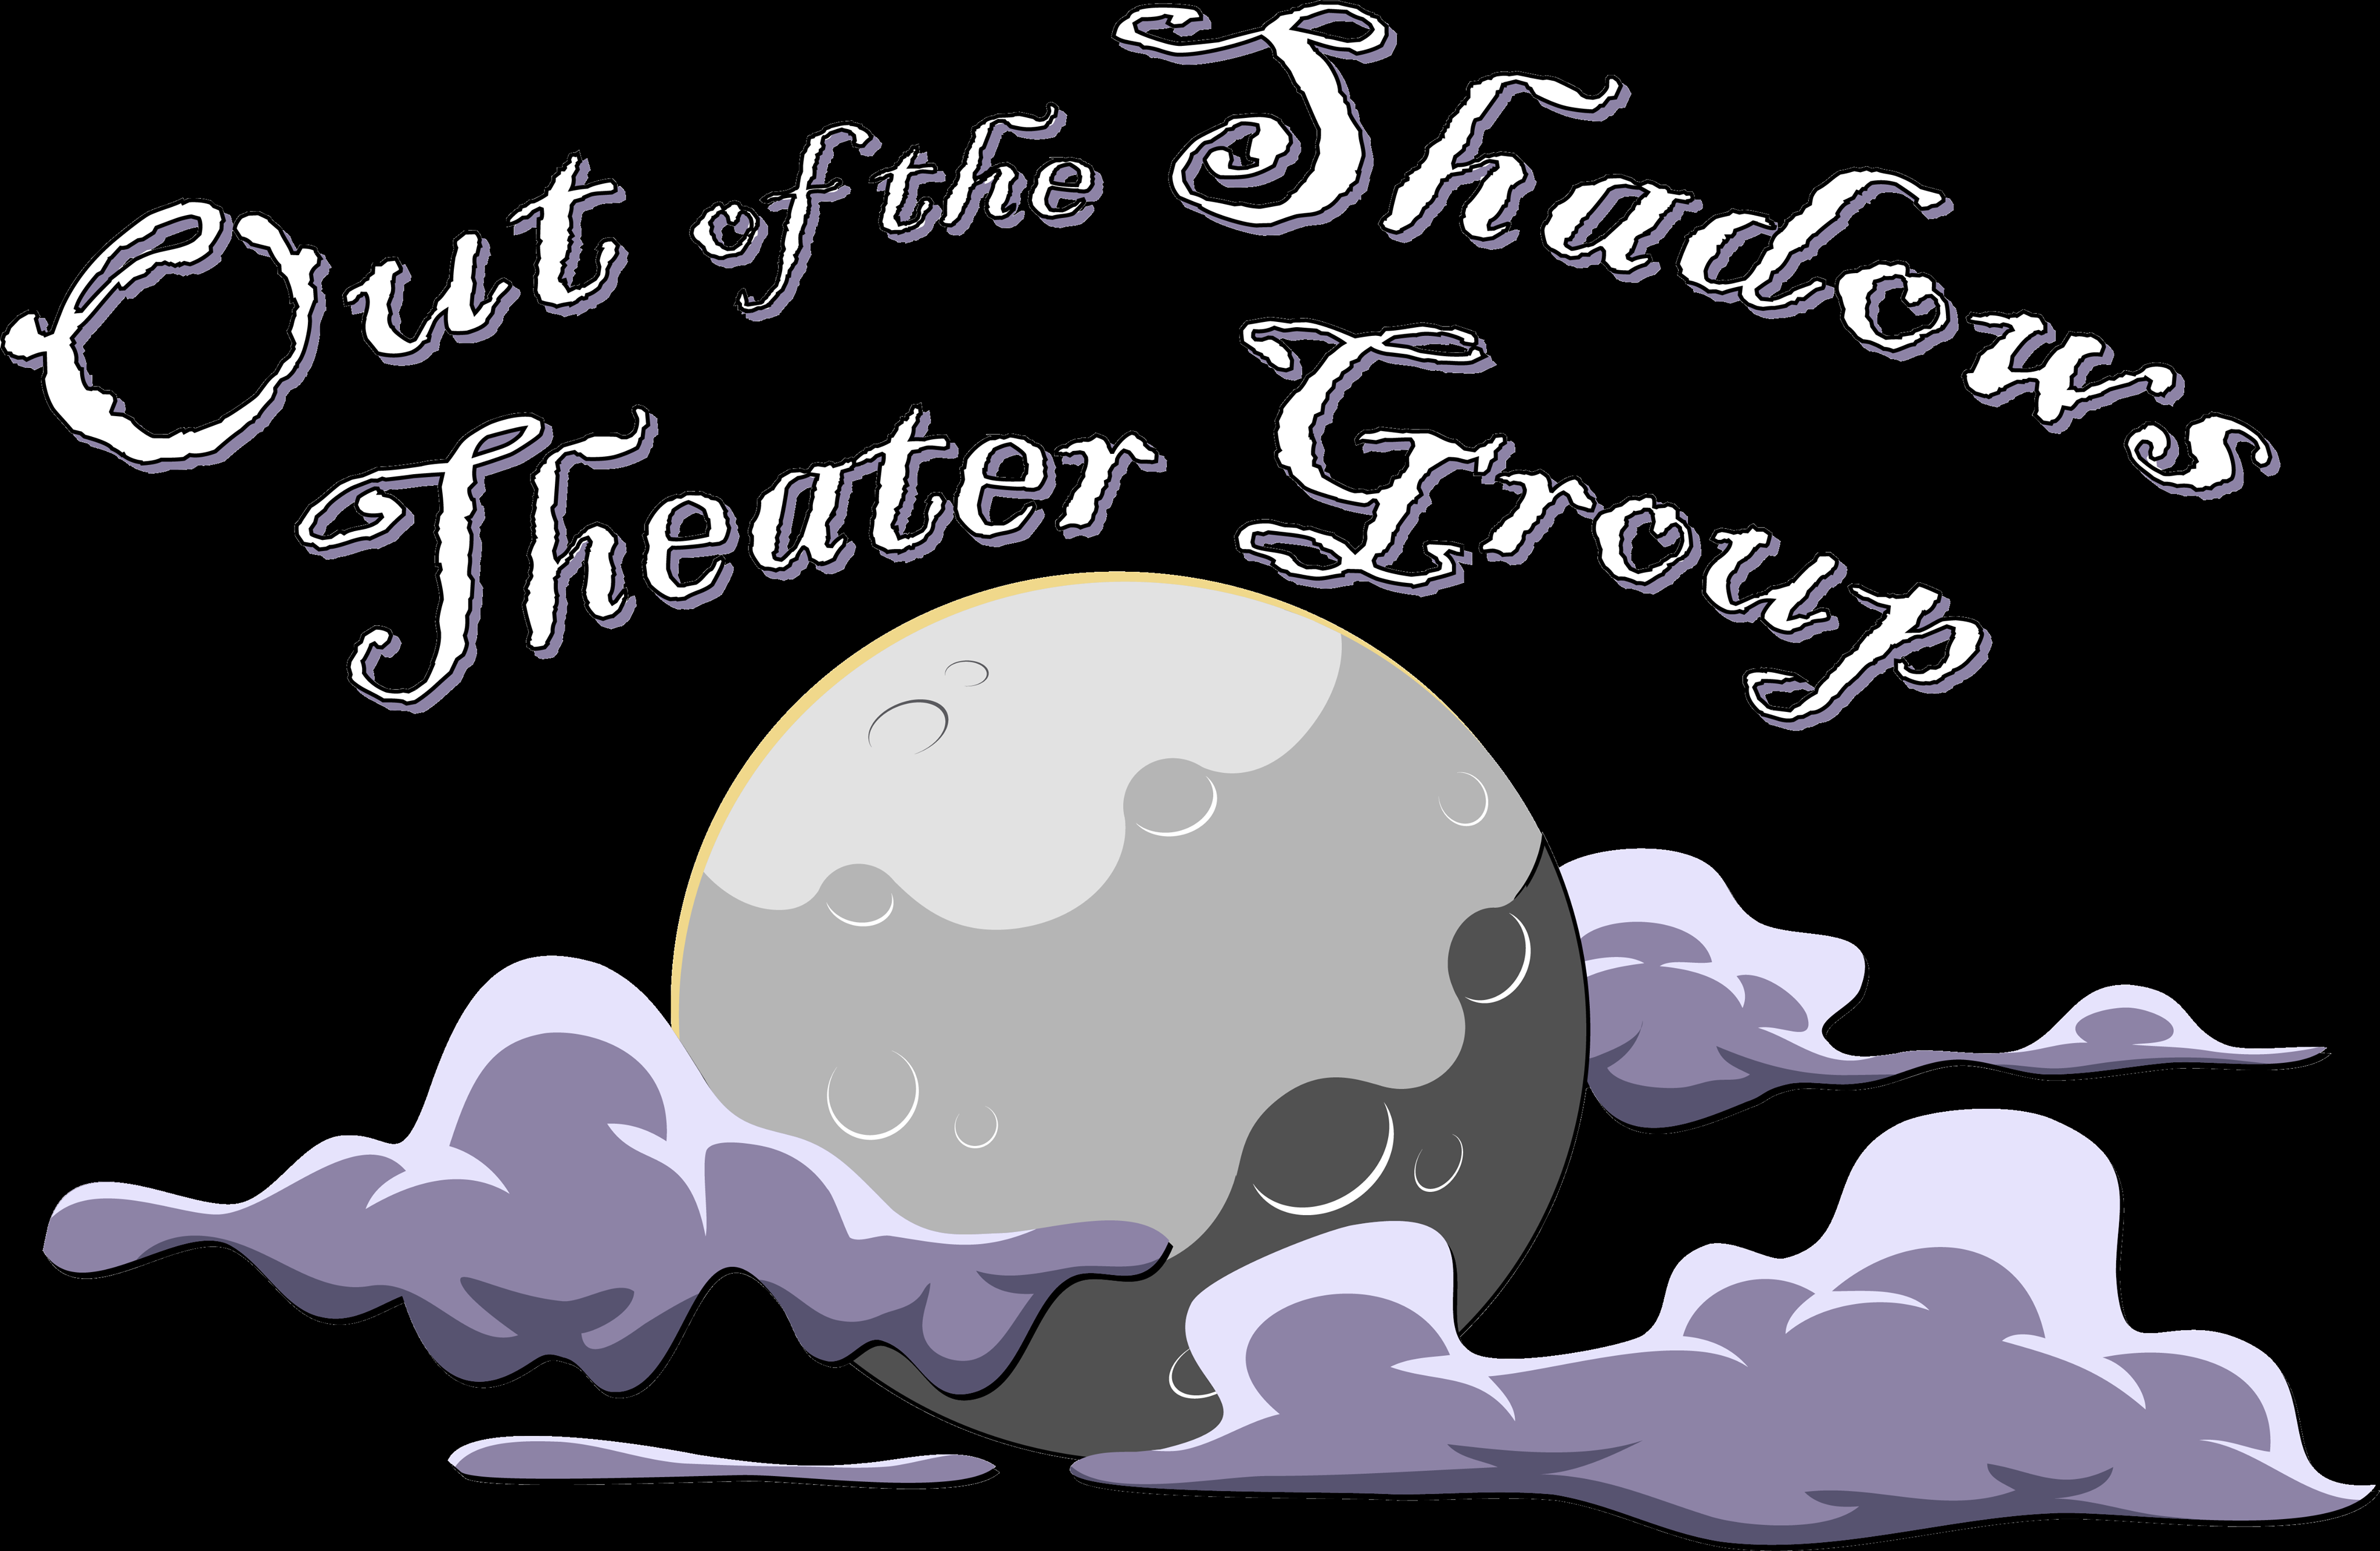 Out of the Shadows Theater Group